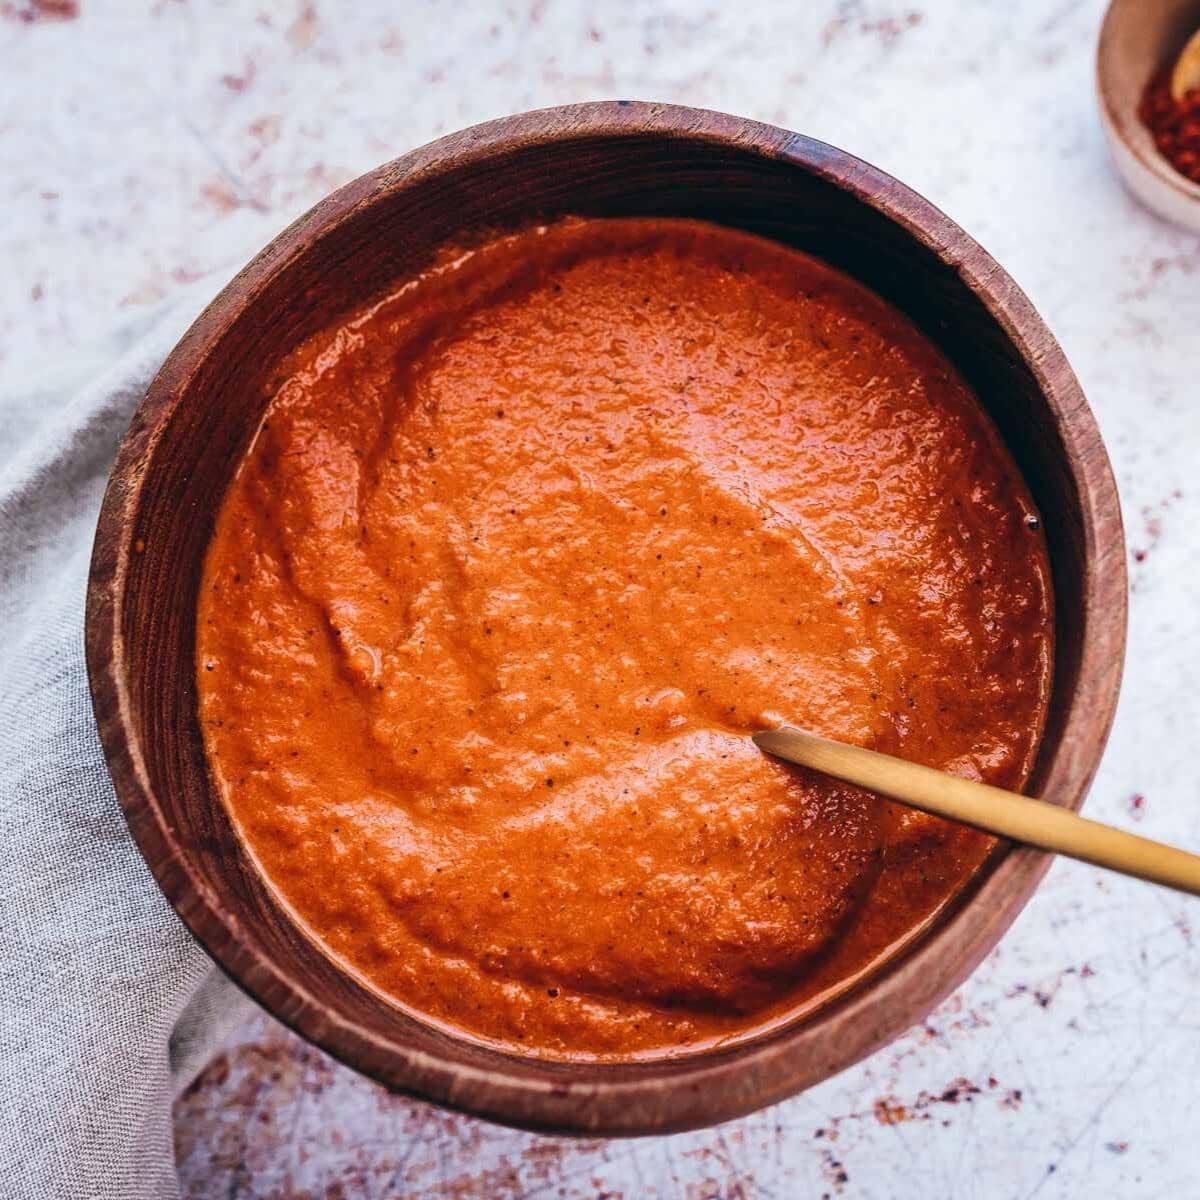 a teak wooden bowl filled with bright red salsa bravas sauce alongside a gold spoon.